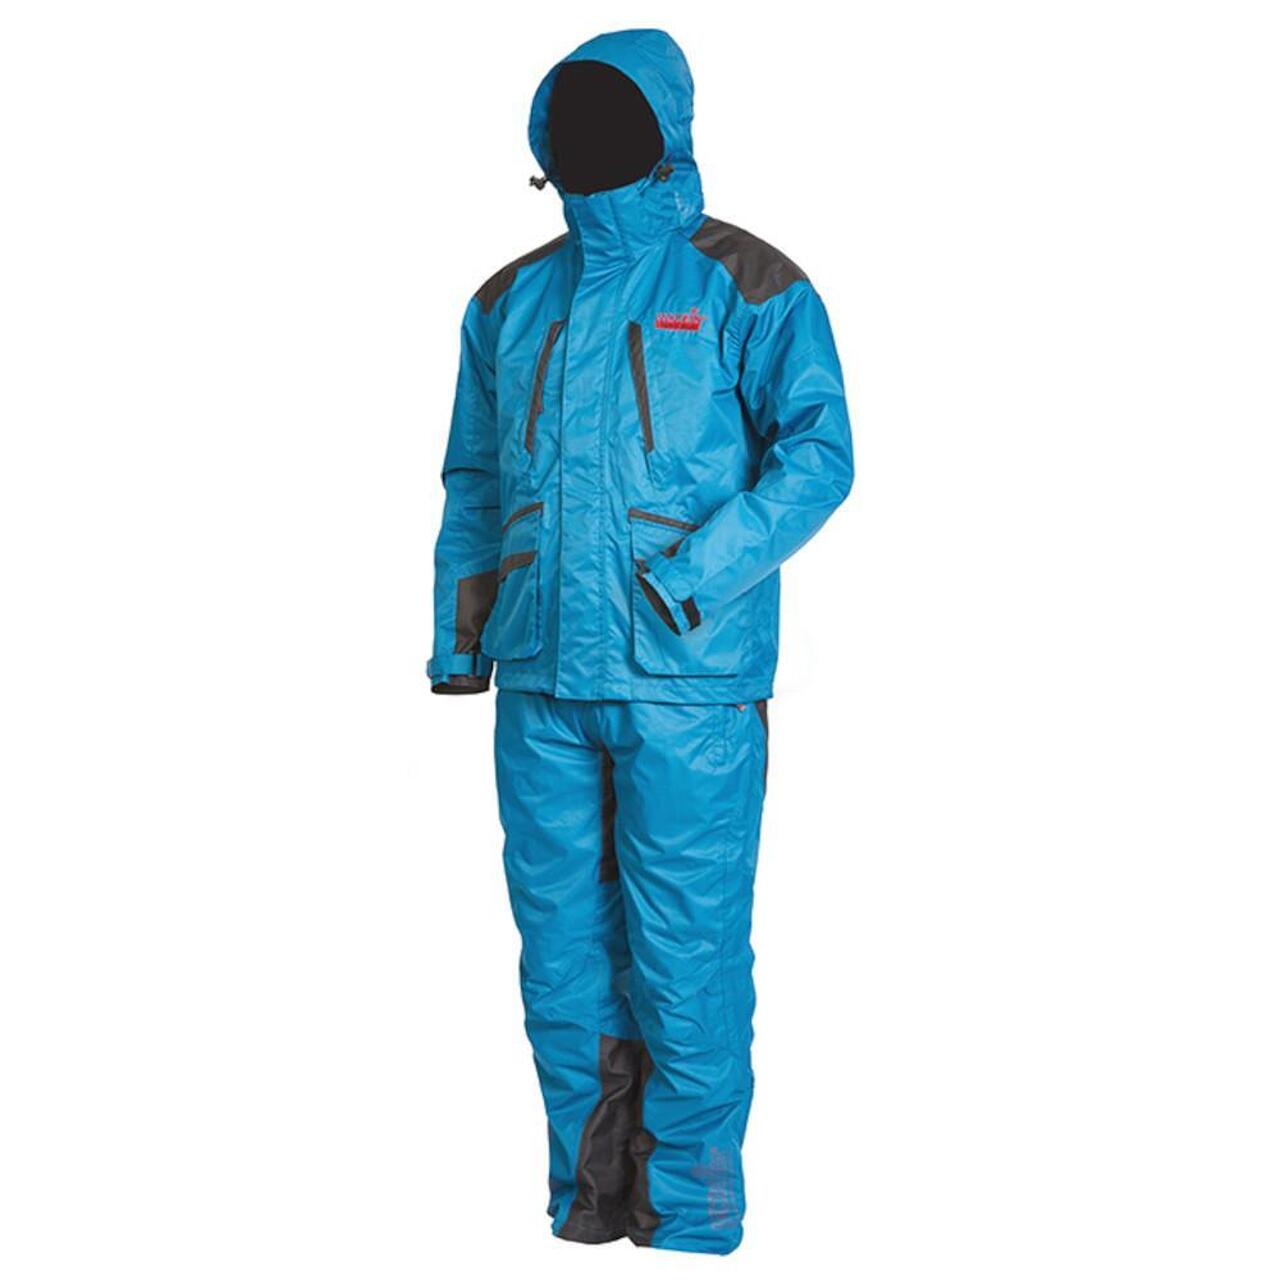 Norfn Spirit Fishing 2 Piece Suit NORTEX BREATHABLE Suit *All Sizes*